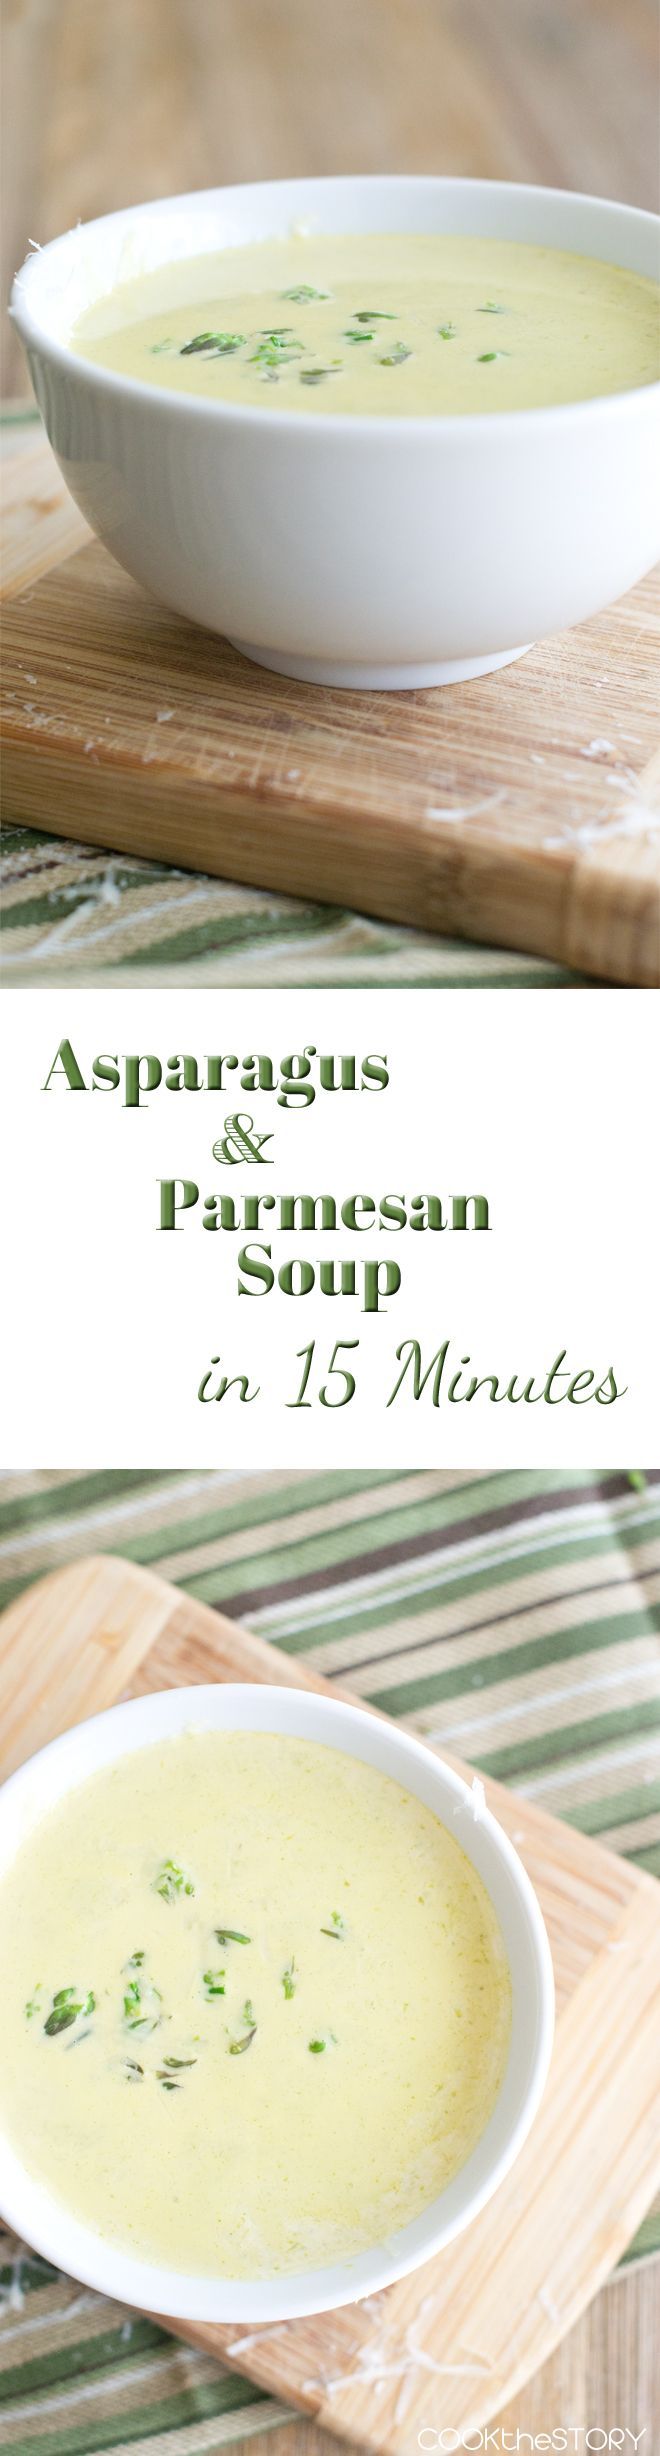 Quick and easy lunch or dinner recipe: Cream of Asparagus Soup with Parmesan and Garlic, made in 15 minutes